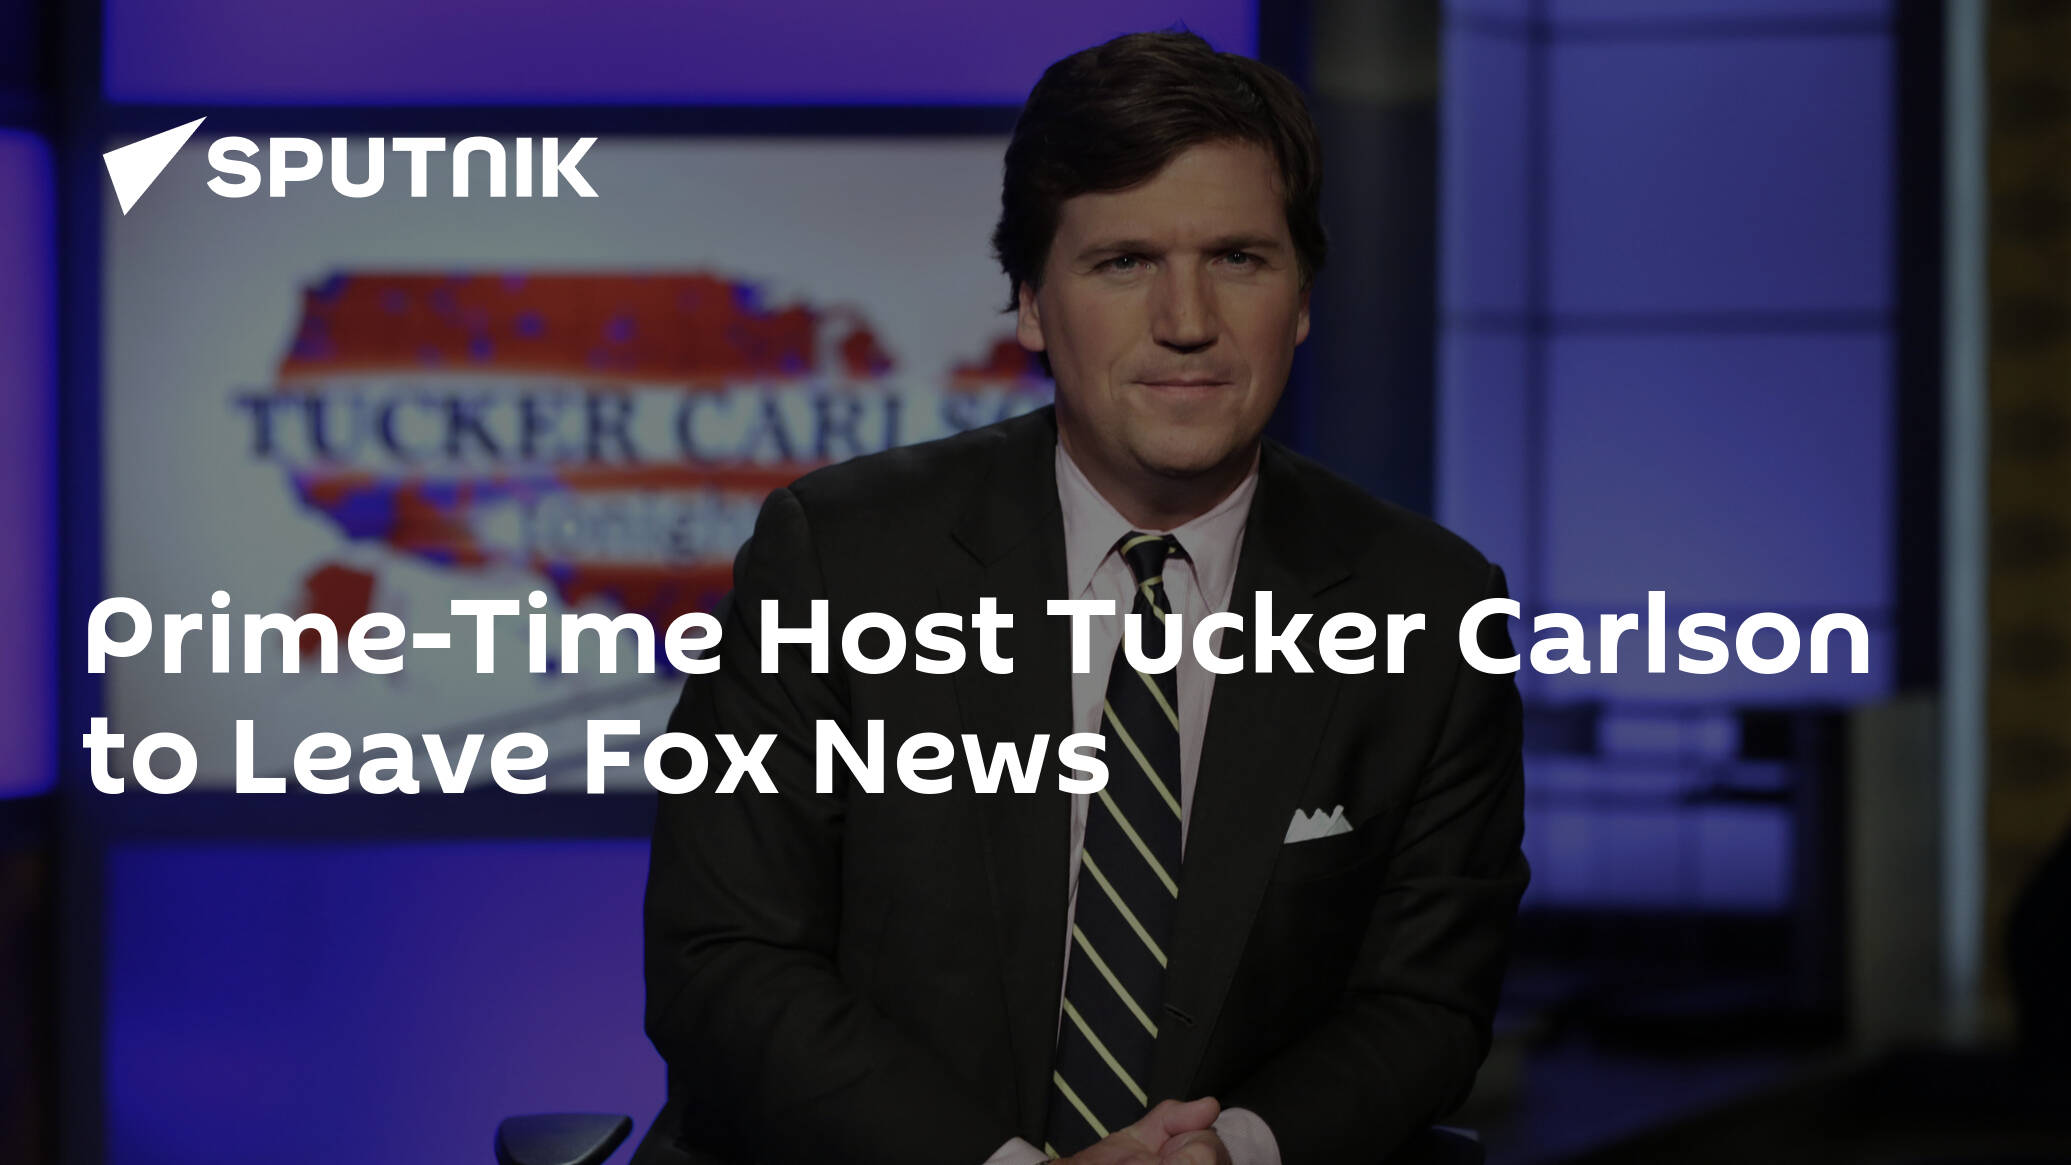 Prime-Time Host Tucker Carlson to Leave Fox News